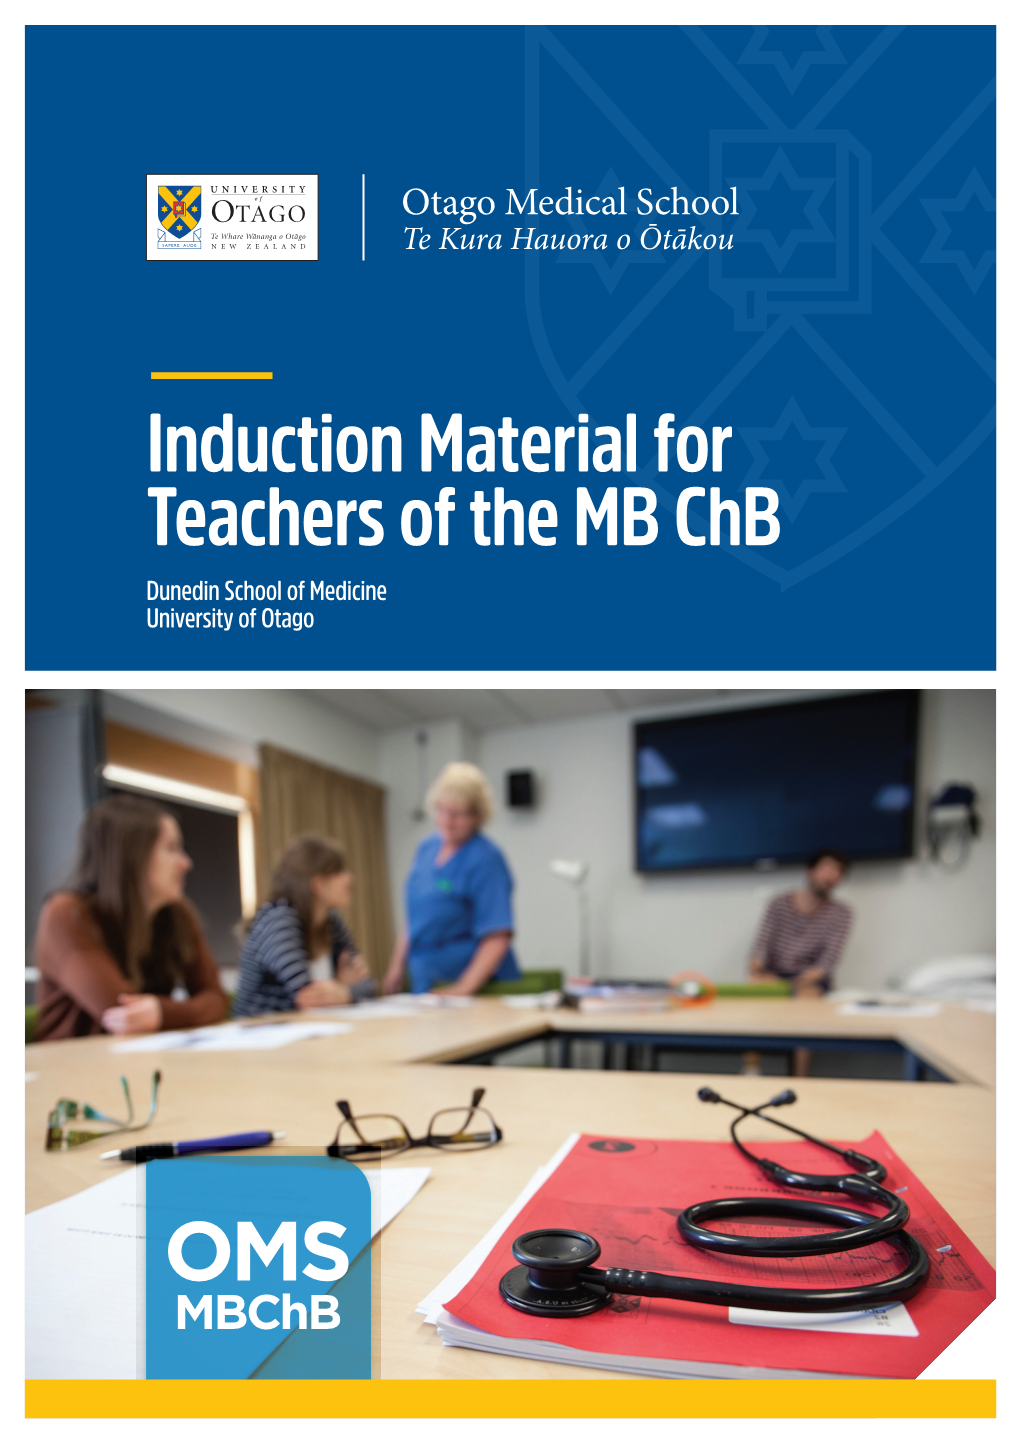 Induction Material for Teachers of the MB Chb Dunedin School of Medicine University of Otago